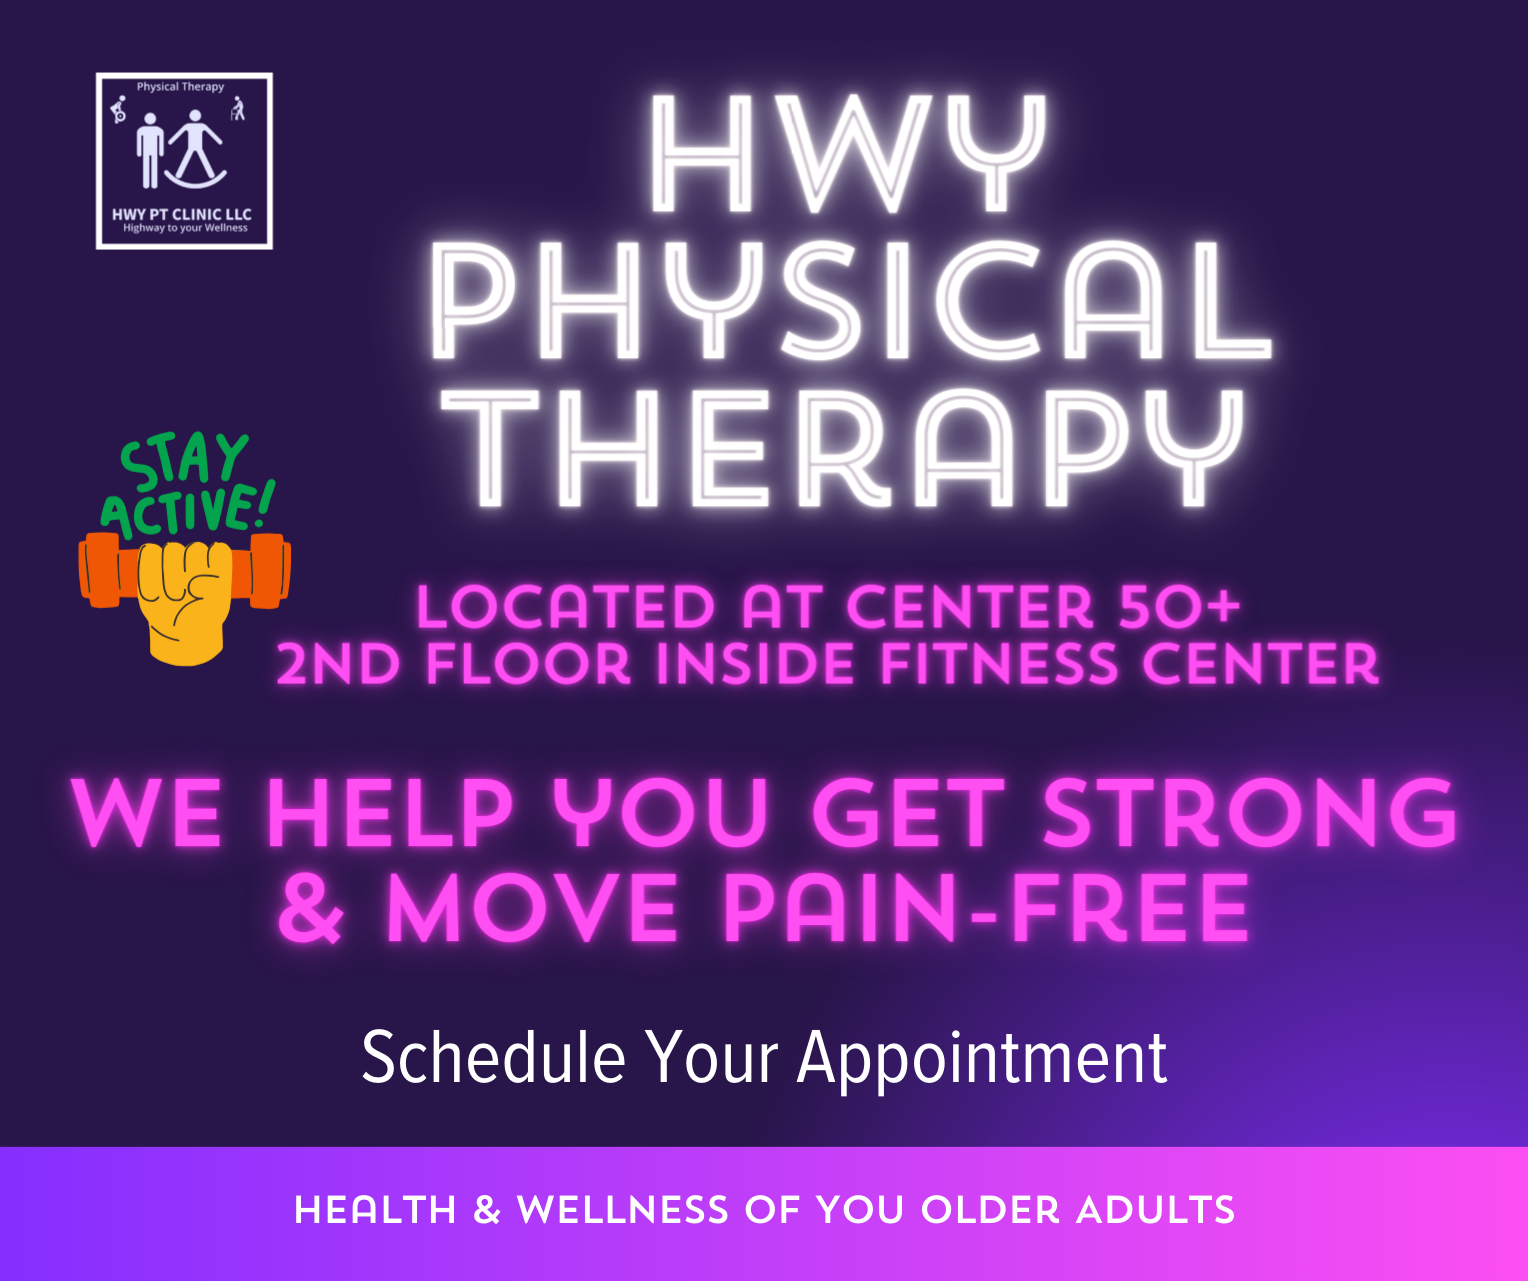 Center 50+ Hwy physical therapy-1